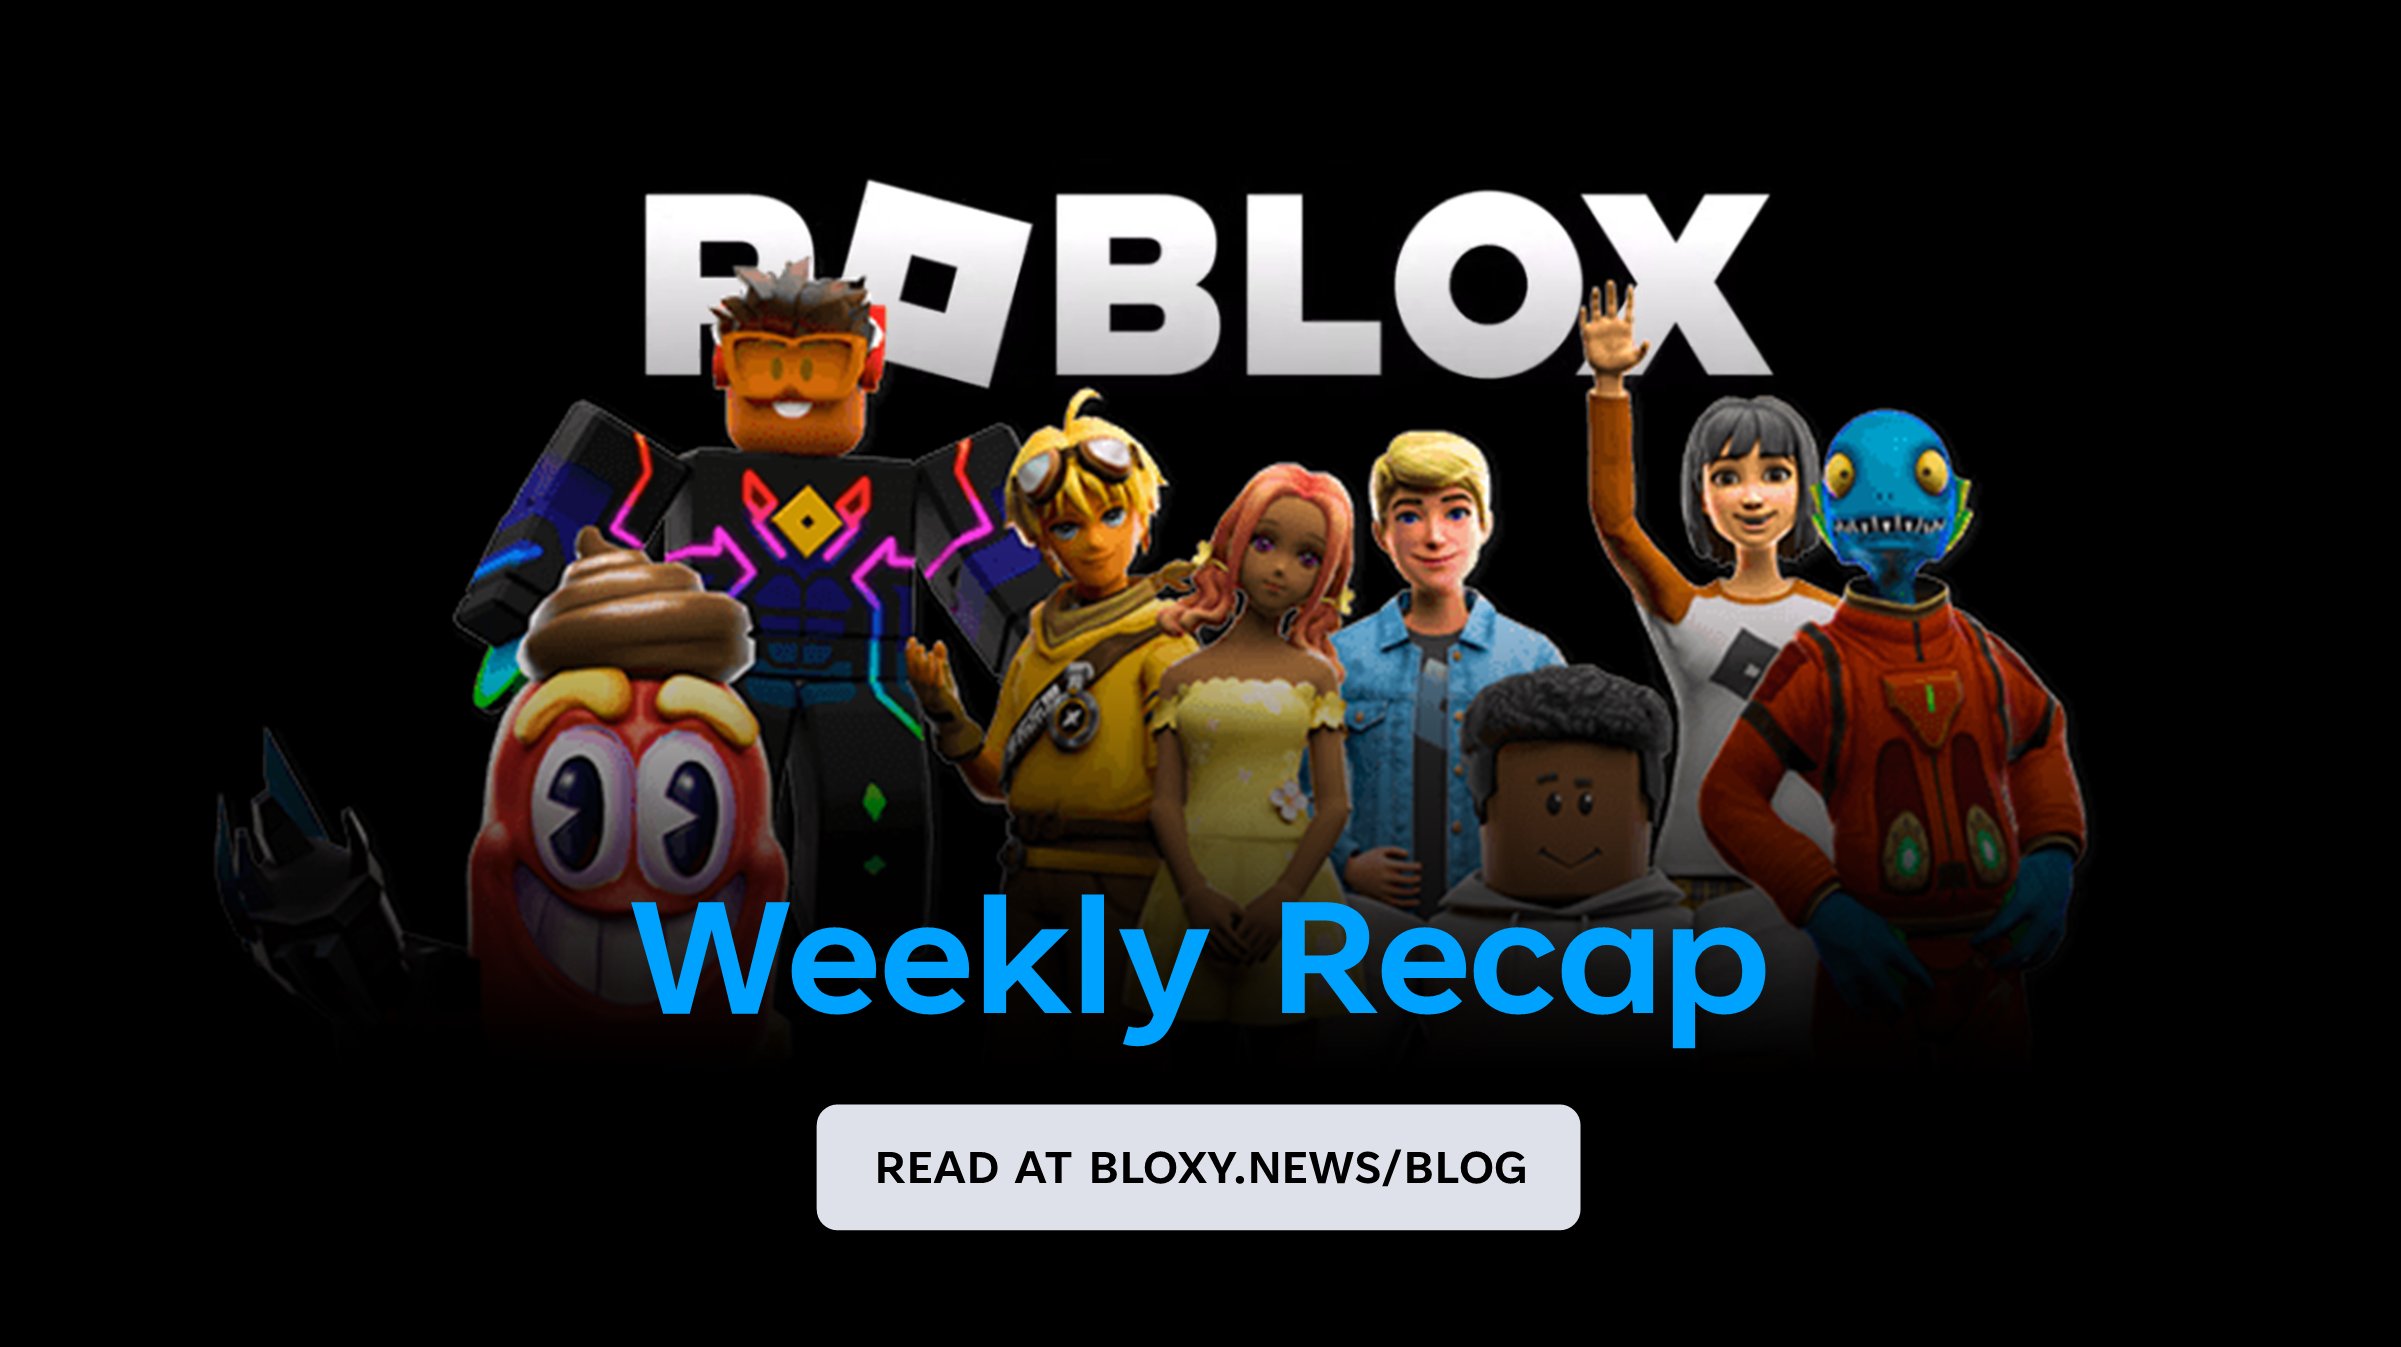 Bloxy News on X: The #Roblox Catalog has been renamed to Avatar